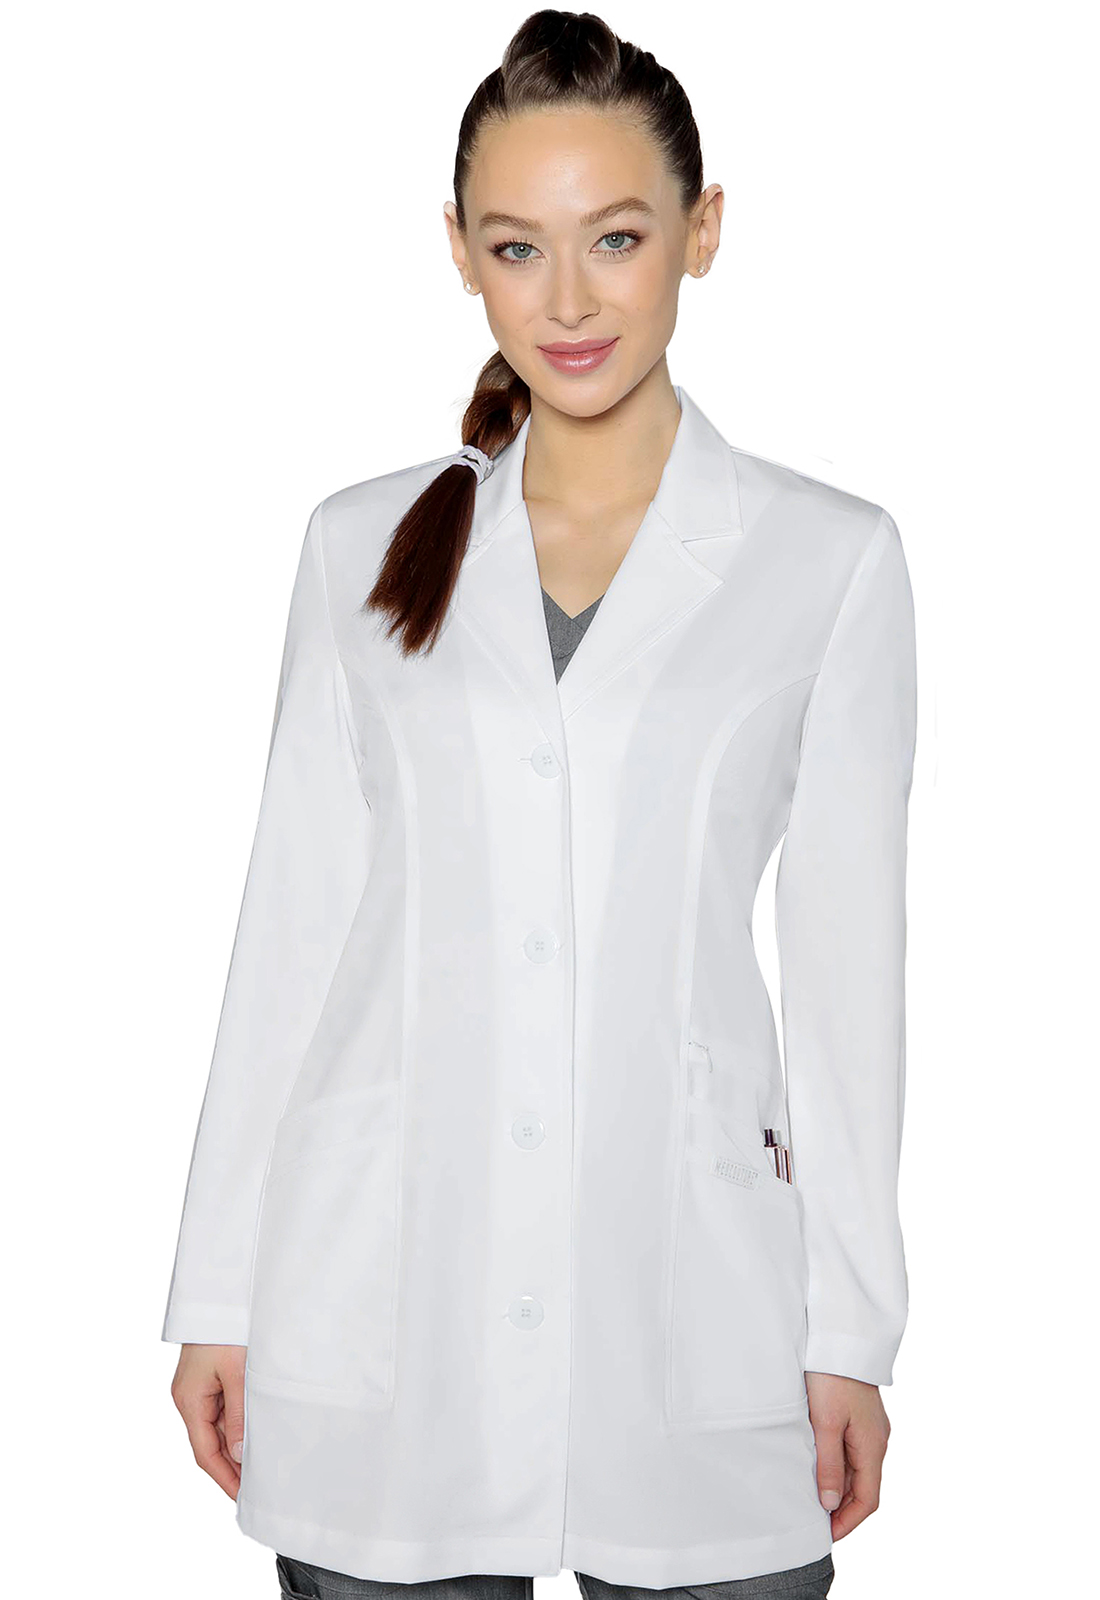 Performance Lab Coat-Med Couture